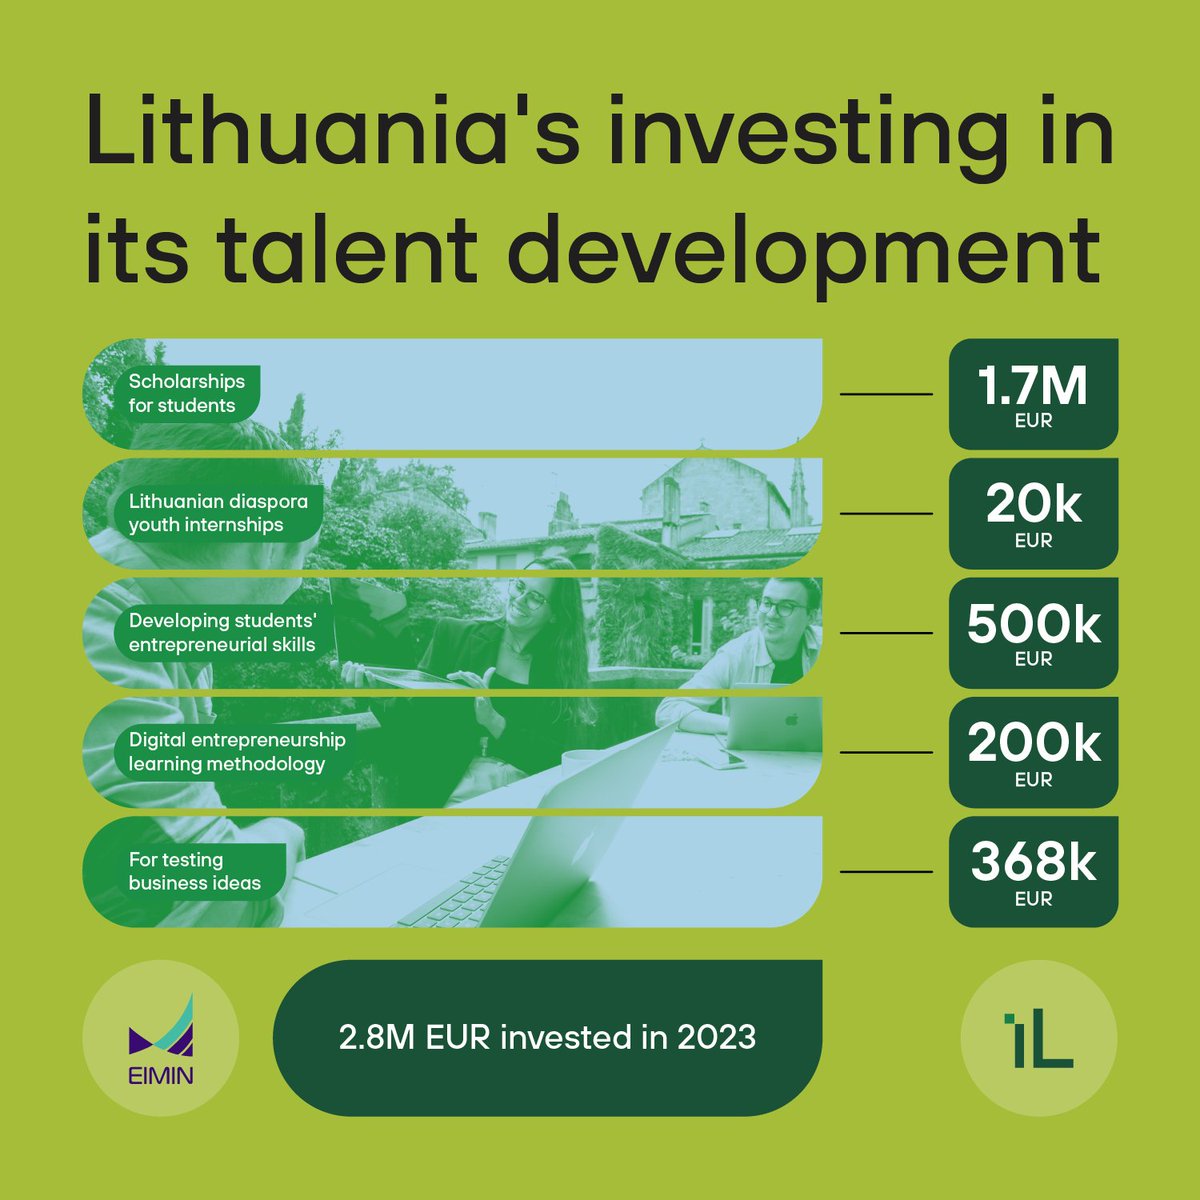 🎓 Last year, #Lithuania invested EUR 2.8M in growing #talents and building future success through international internships, targeted scholarships in #STEM, and schools programmes for junior digital entrepreneurs. Find out more (article in LT) ⤵️ eimin.lrv.lt/lt/ziniasklaid…